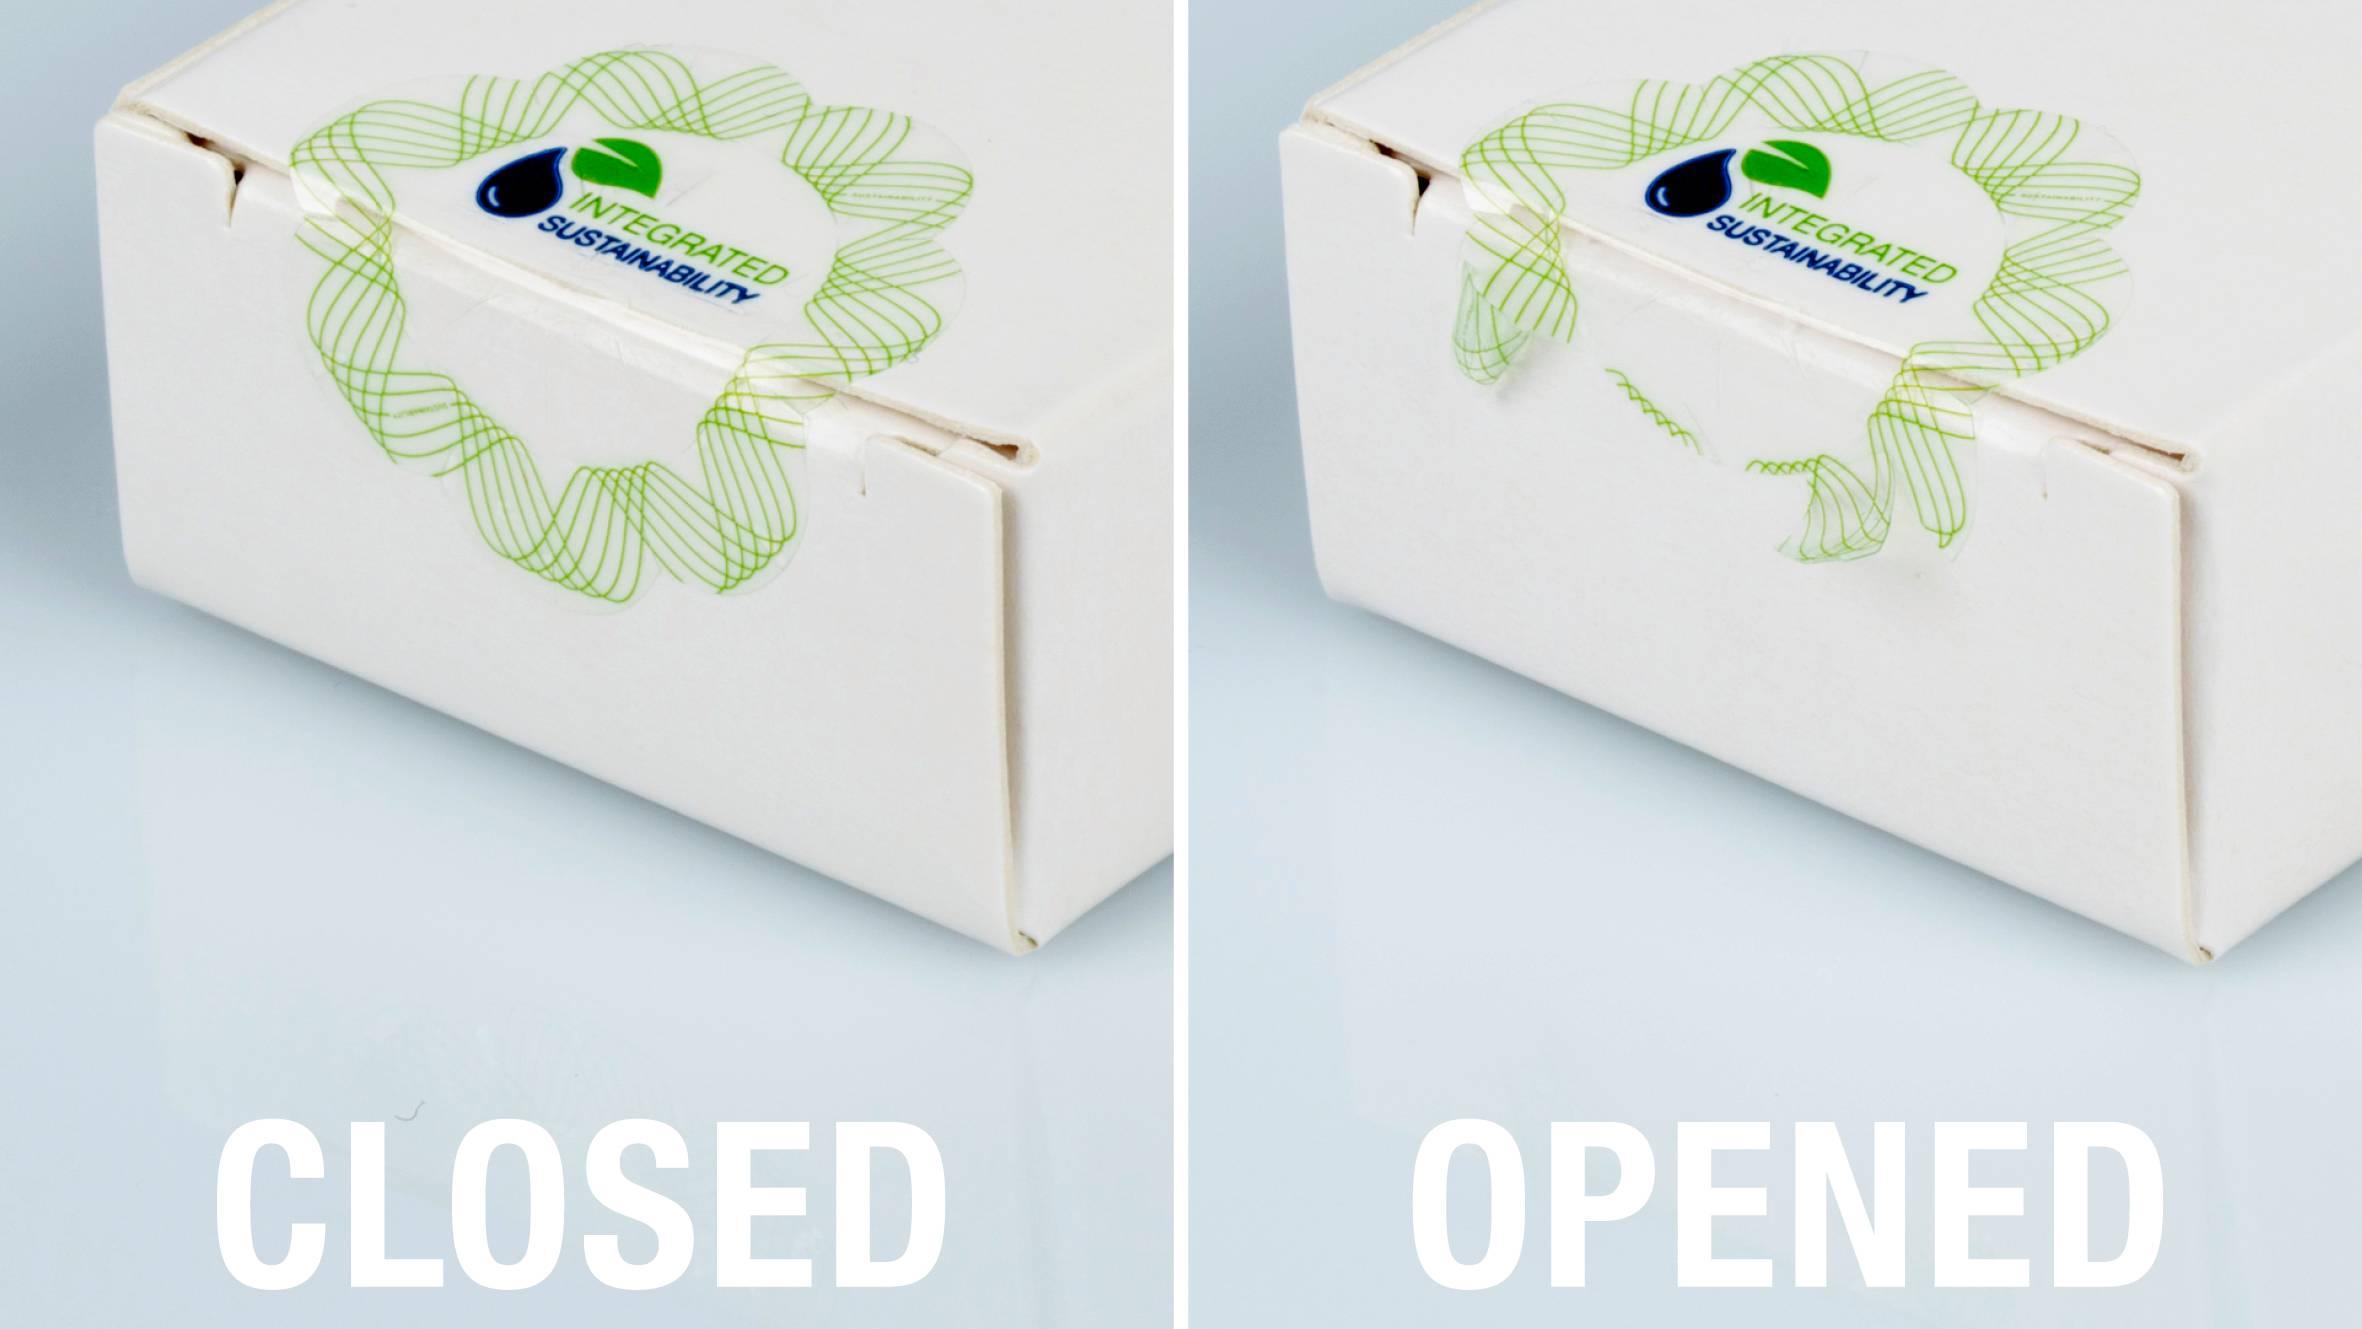 The sustainable closure seals from Schreiner MediPharm have a recyclate content of up to 90% and offer reliable tamper evidence.